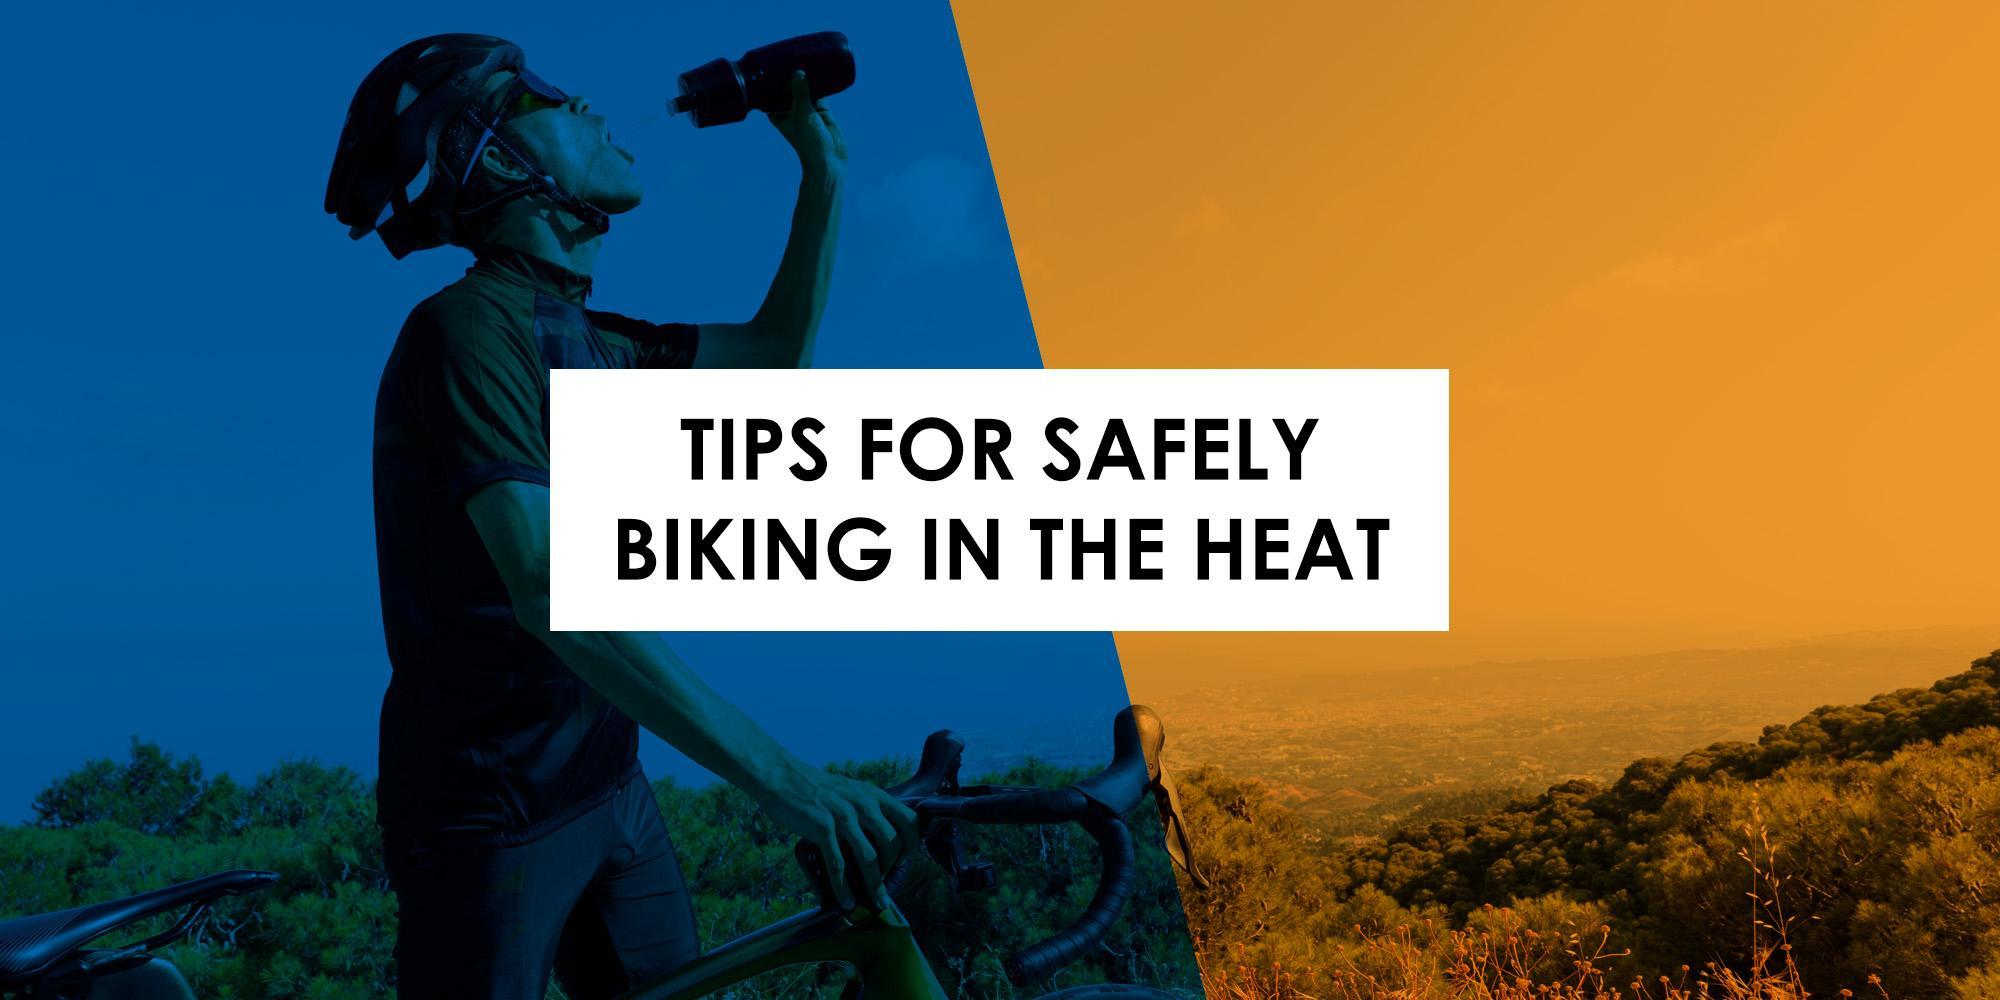 Biking in the Heat: Tips to keep you cool and safe